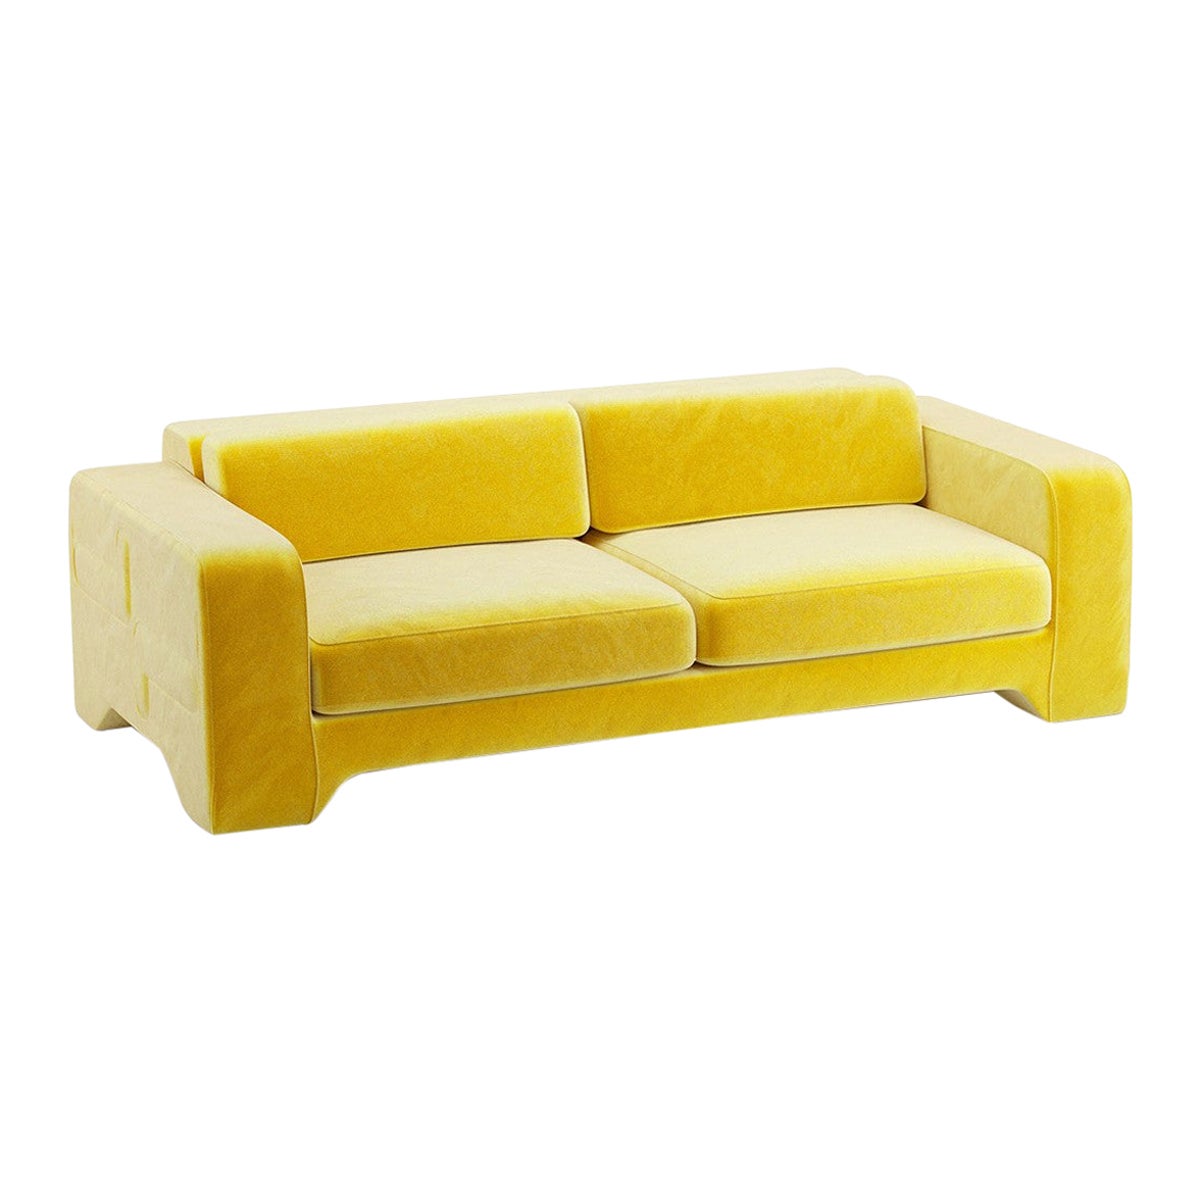 Popus Editions Giovanna 2.5 Seater Sofa in Yellow Verone Velvet Upholstery